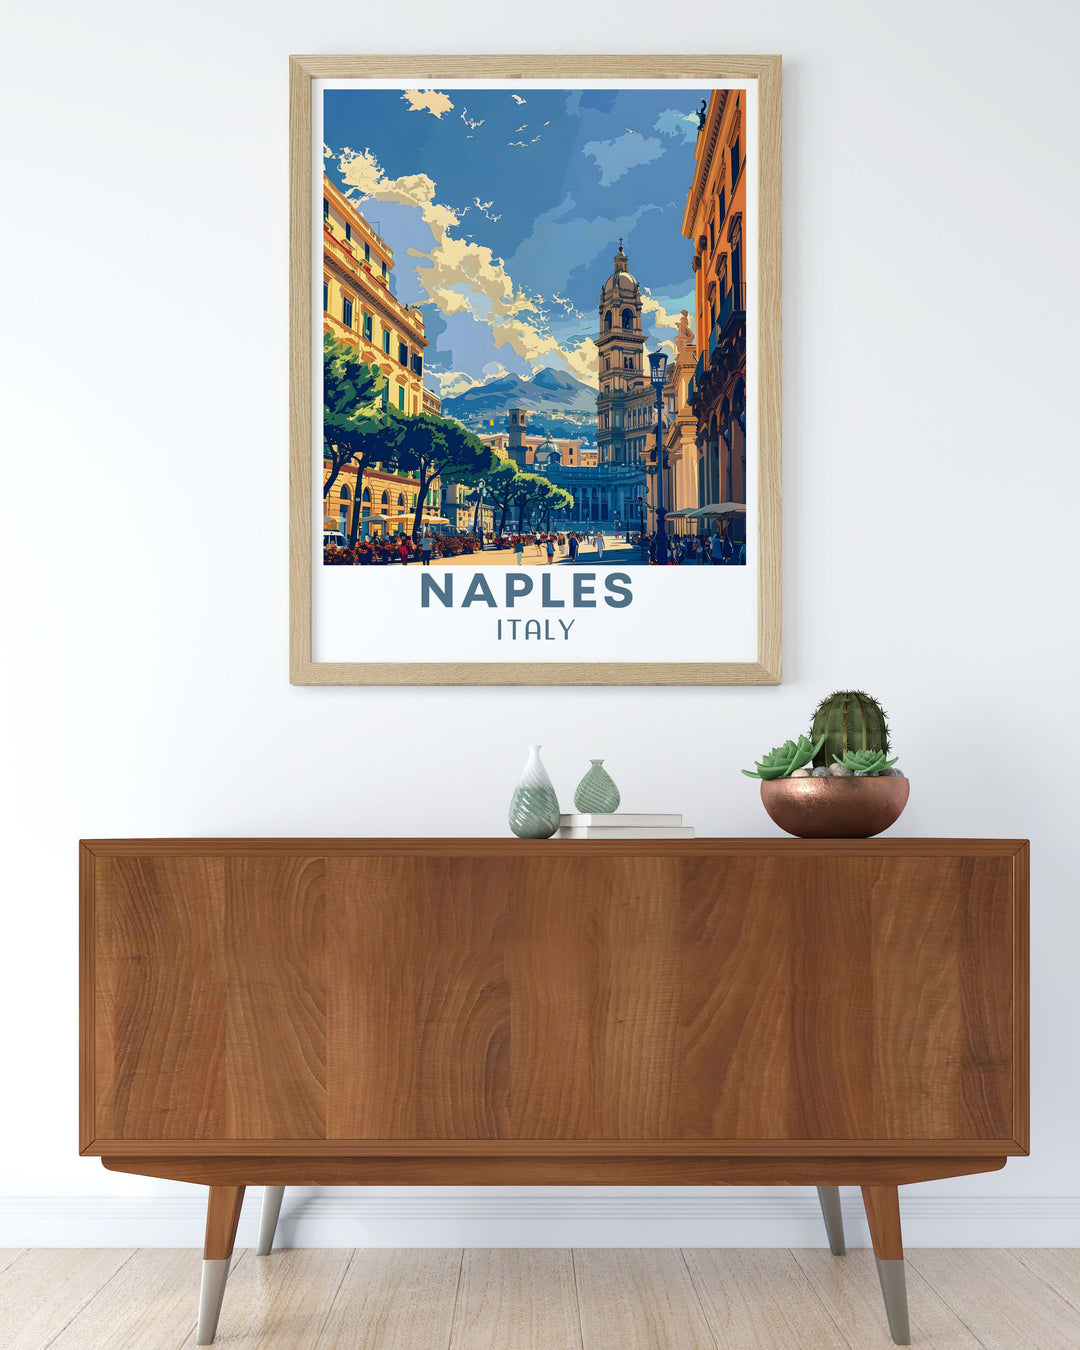 NAPLES Art Print highlighting the cultural richness and scenic beauty of Naples Italy with Piazza del Plebiscito. A perfect gift for travel lovers and art enthusiasts. Great for enhancing any living space with Italian charm